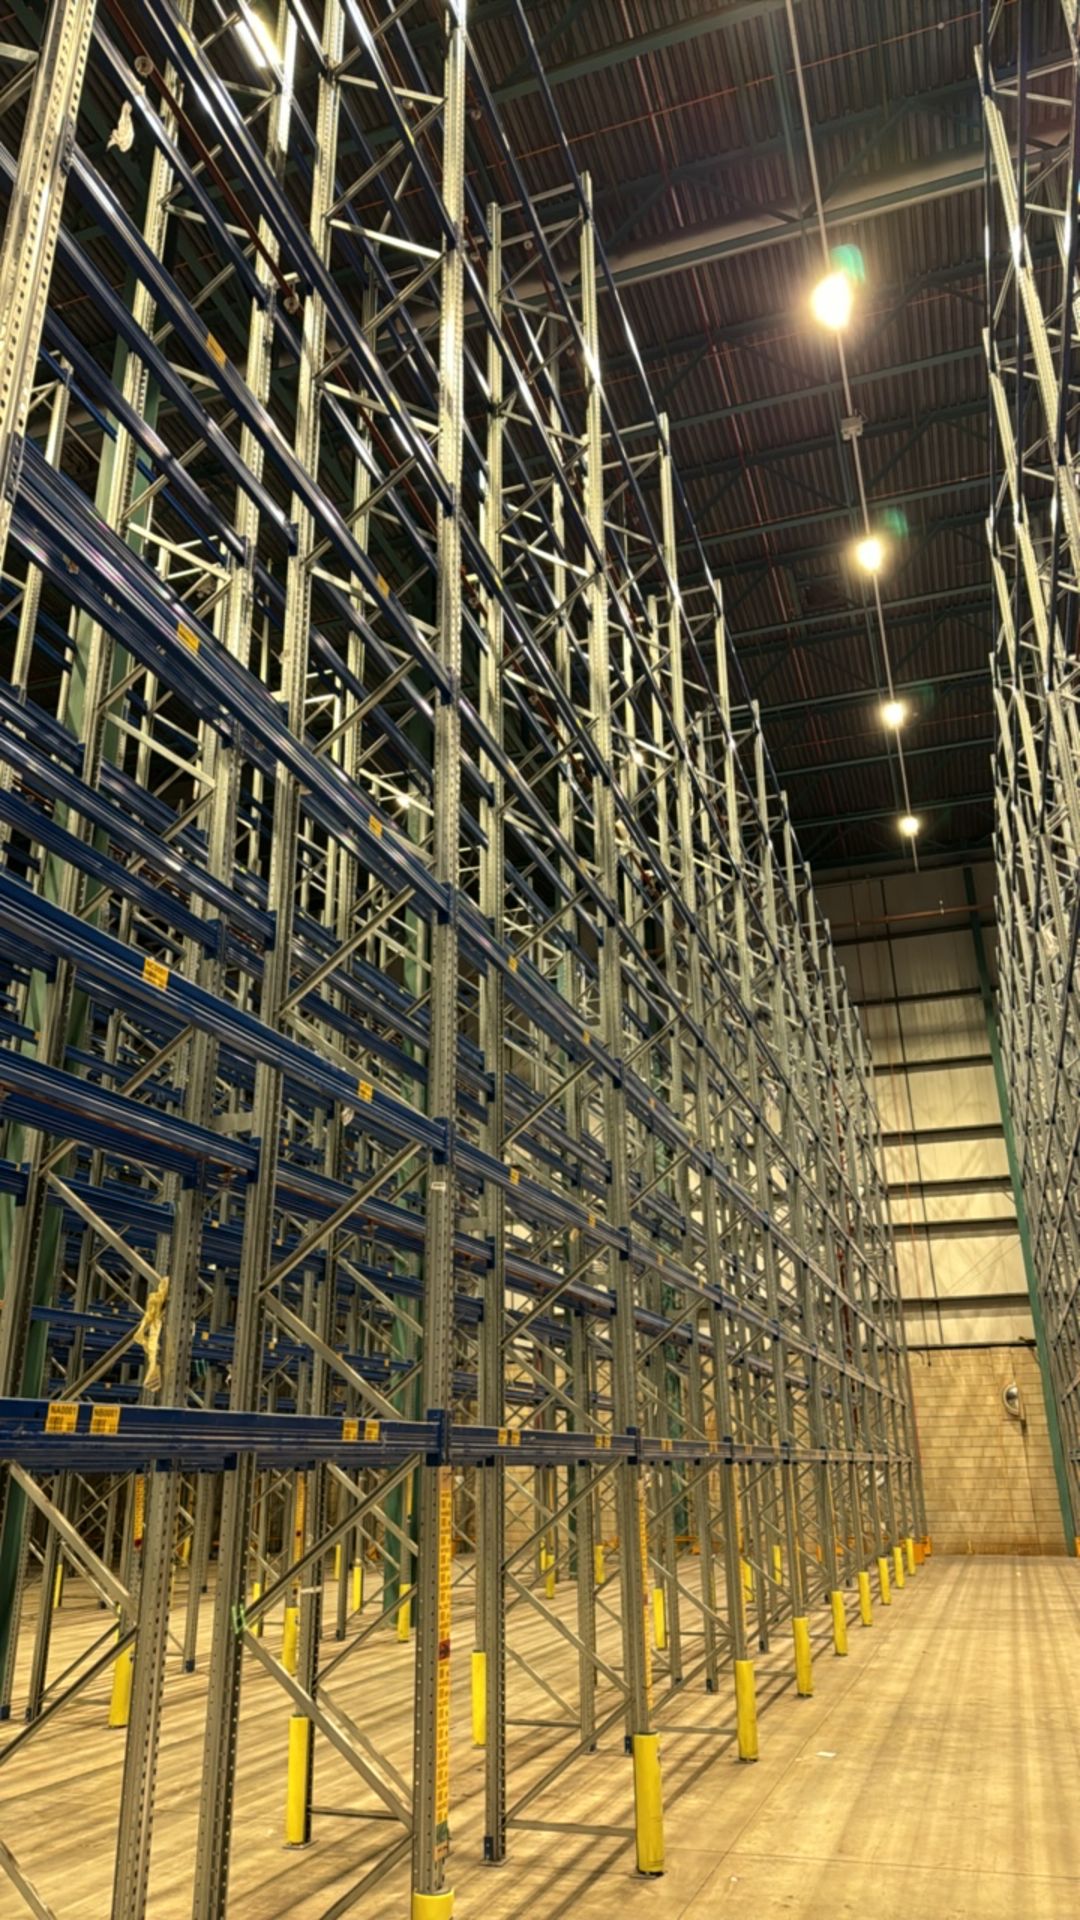 Run Of 22 Bays Of Back To Back Bolt-less Pallet Racking - Image 4 of 10